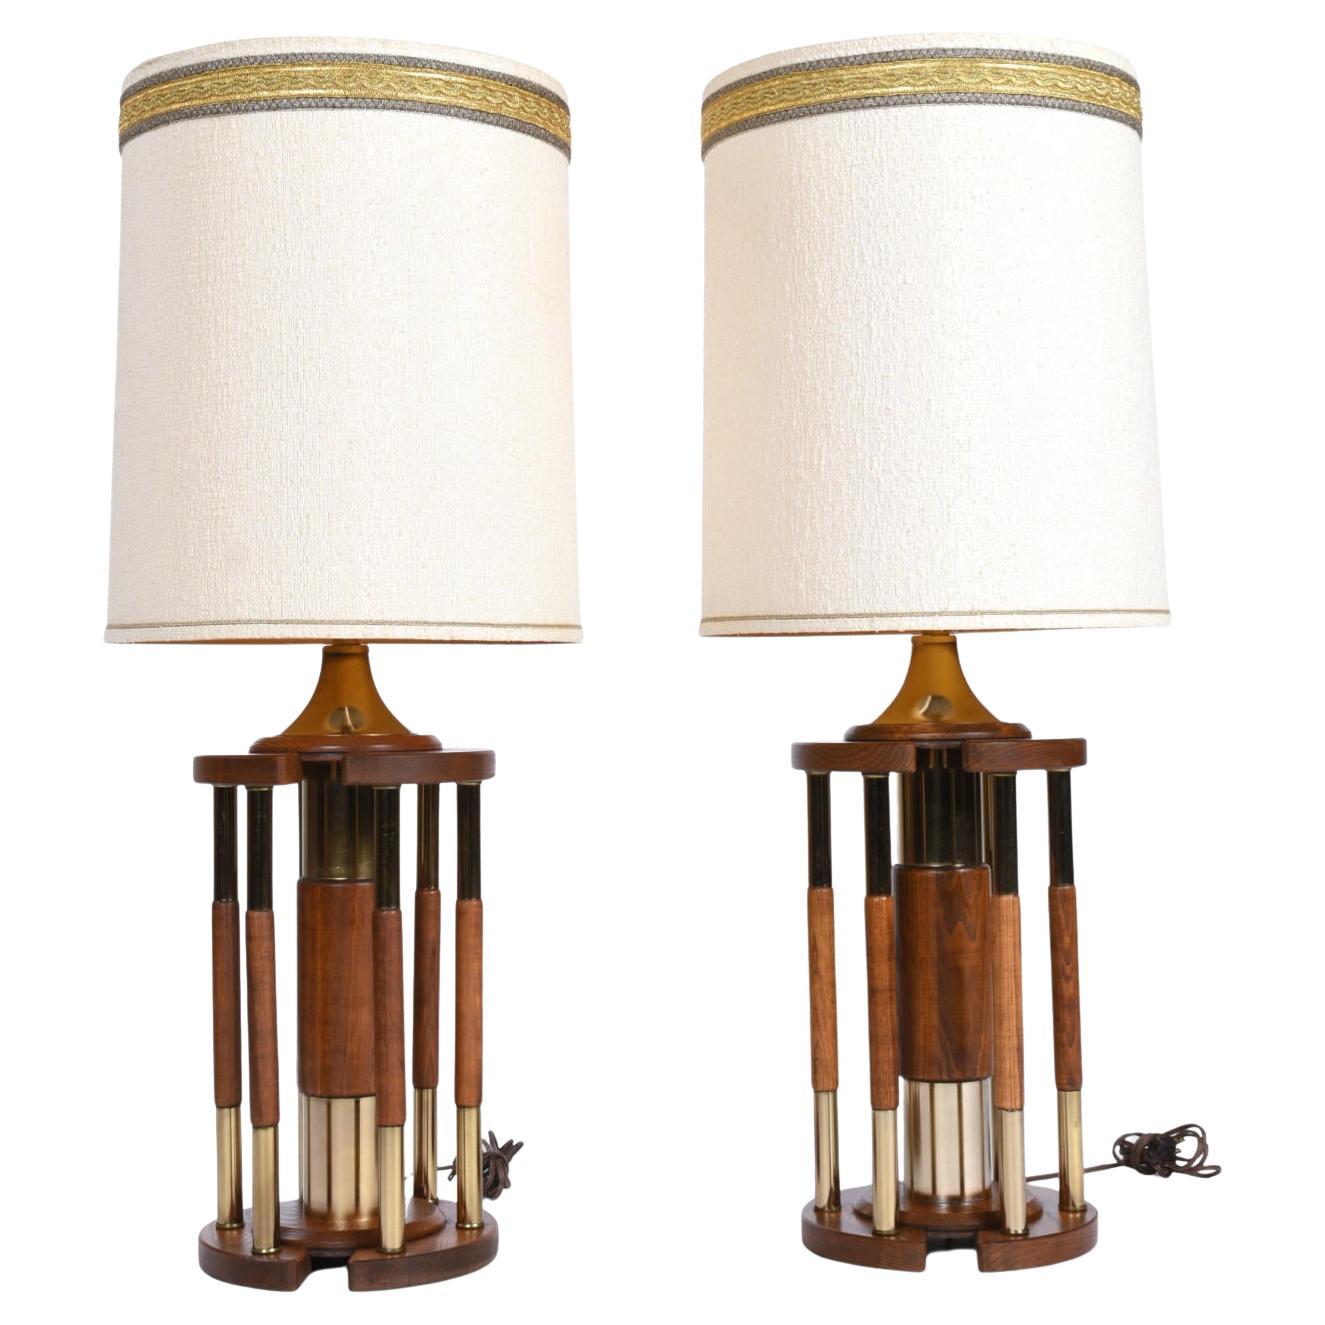 Shades included, and sold as a pair. 

Vintage 1970s jumbo table lamps with architectural rotunda design. The cylindrical lamps feature an array of gold colored brass and oak pillars. The brass plated metal with solid oak accents are a true